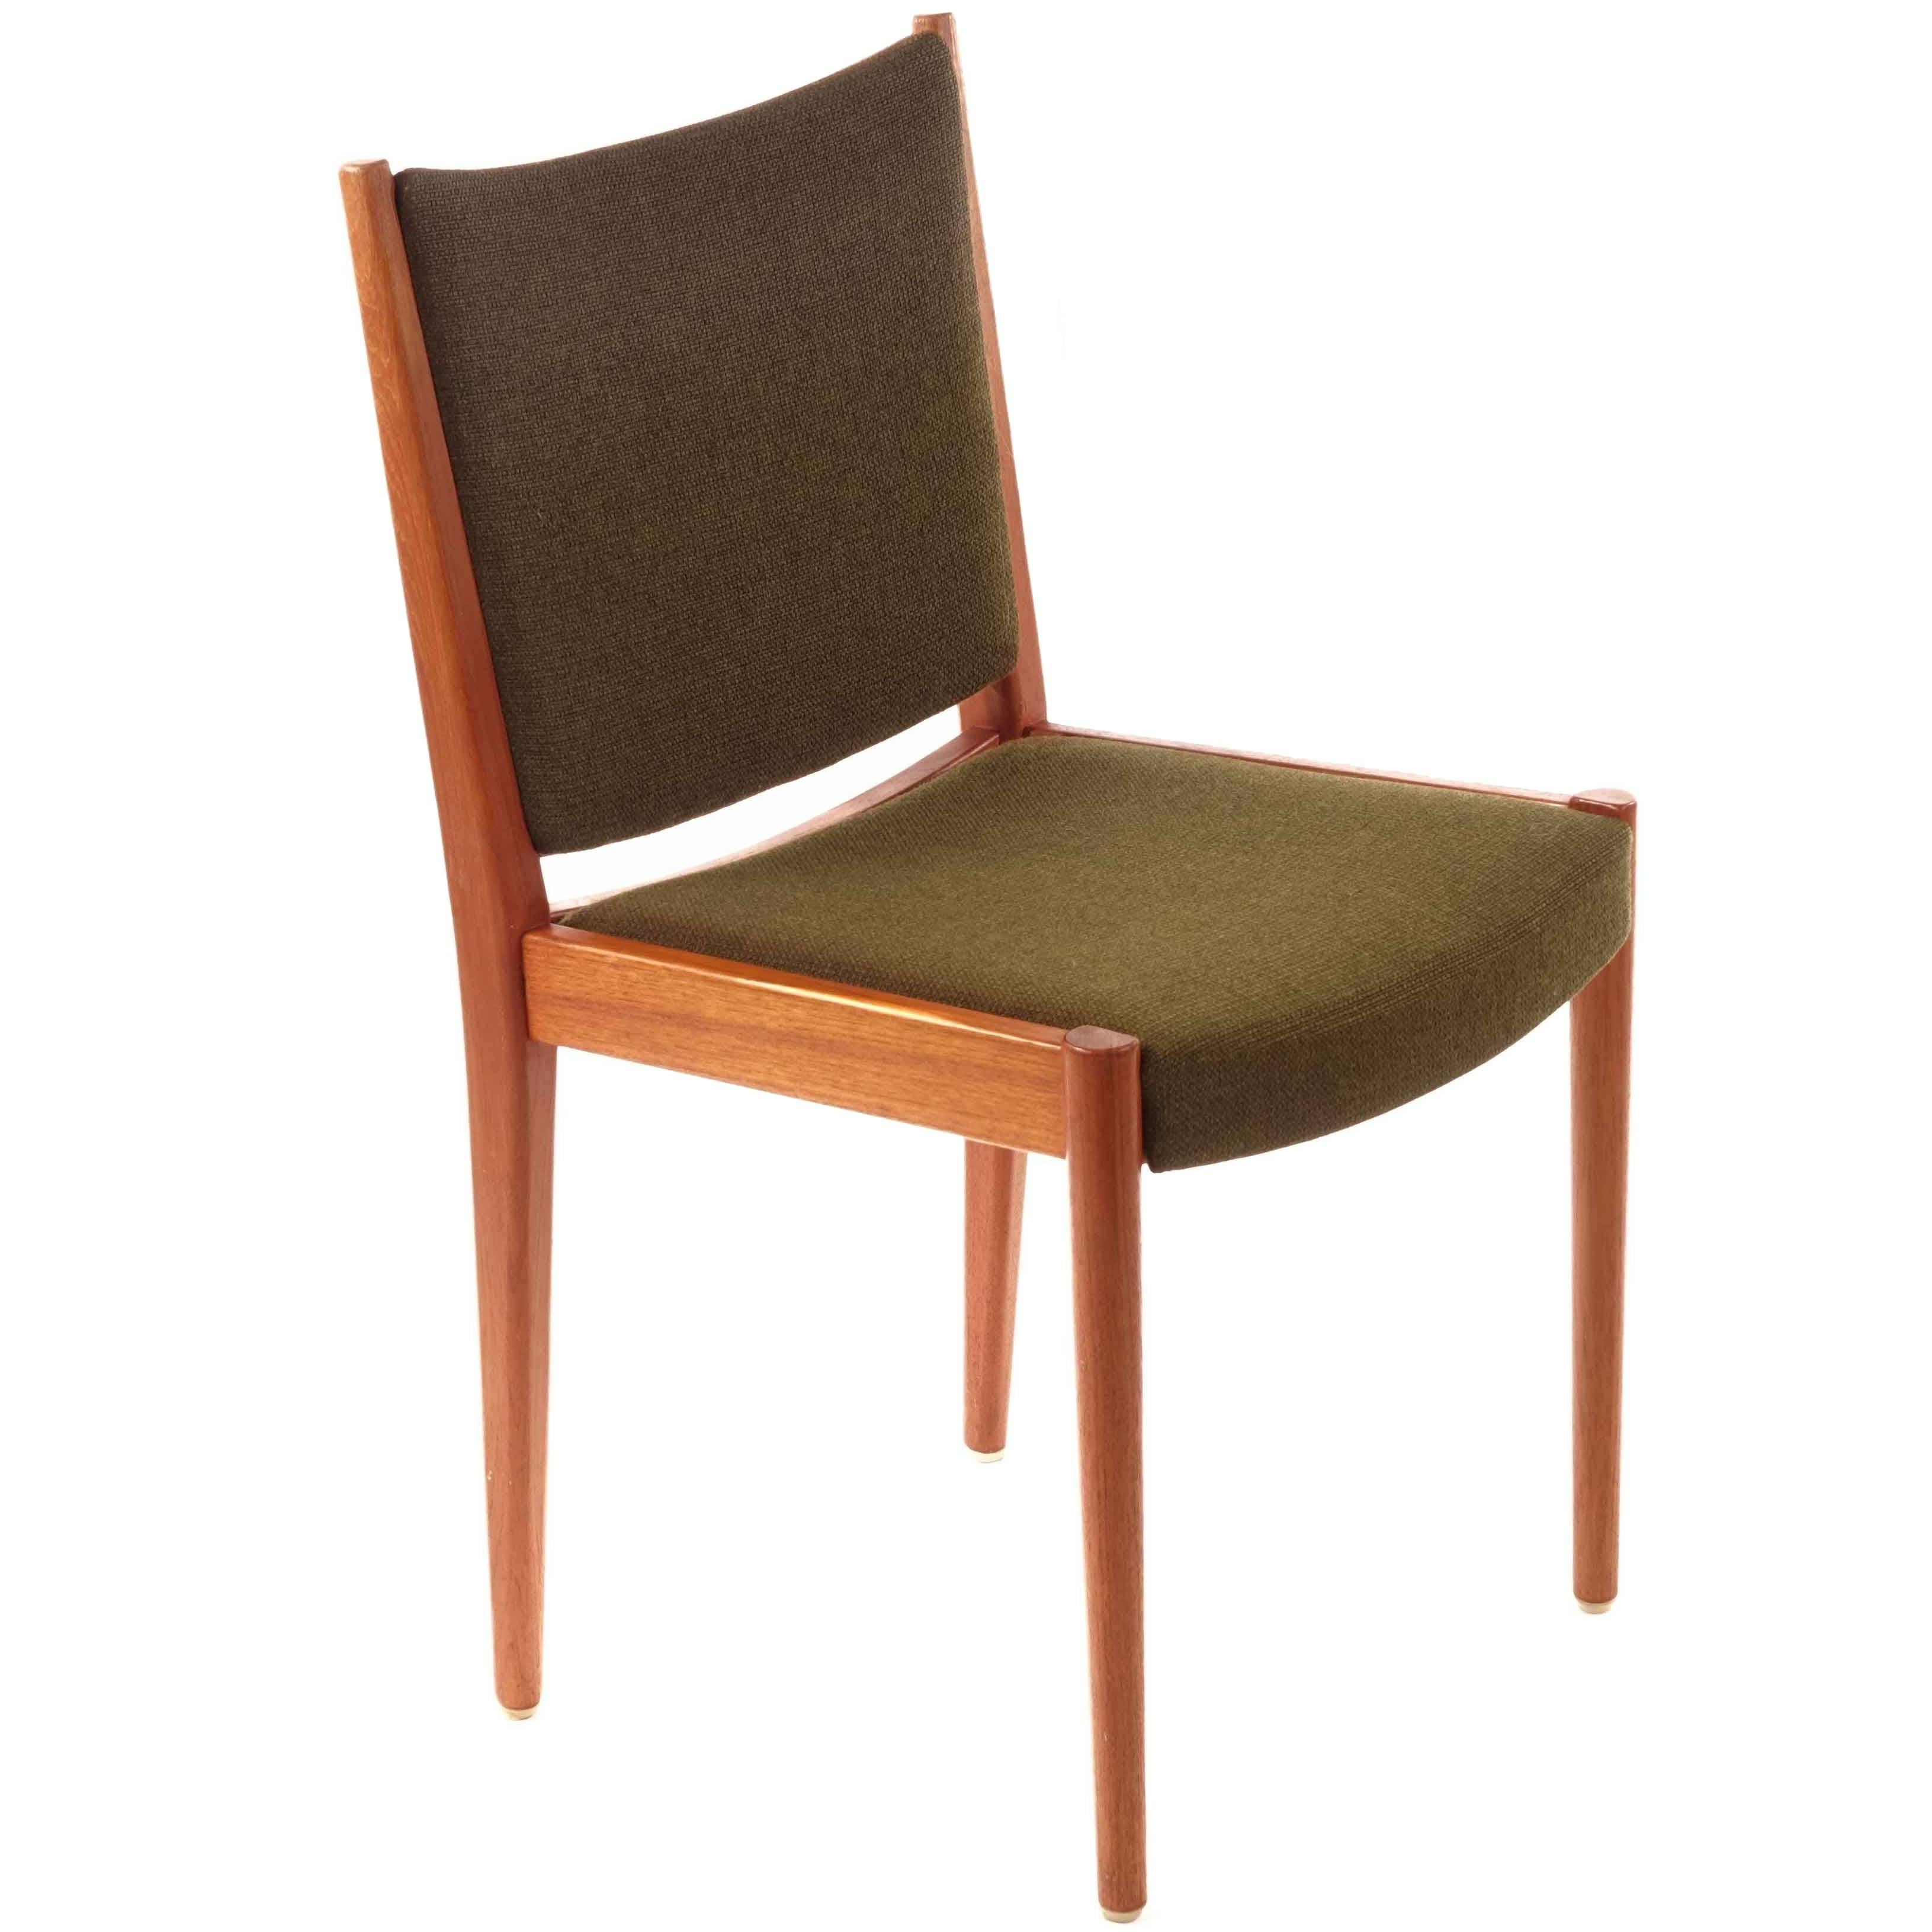 Swedish Retro Chairs from 1950s For Sale